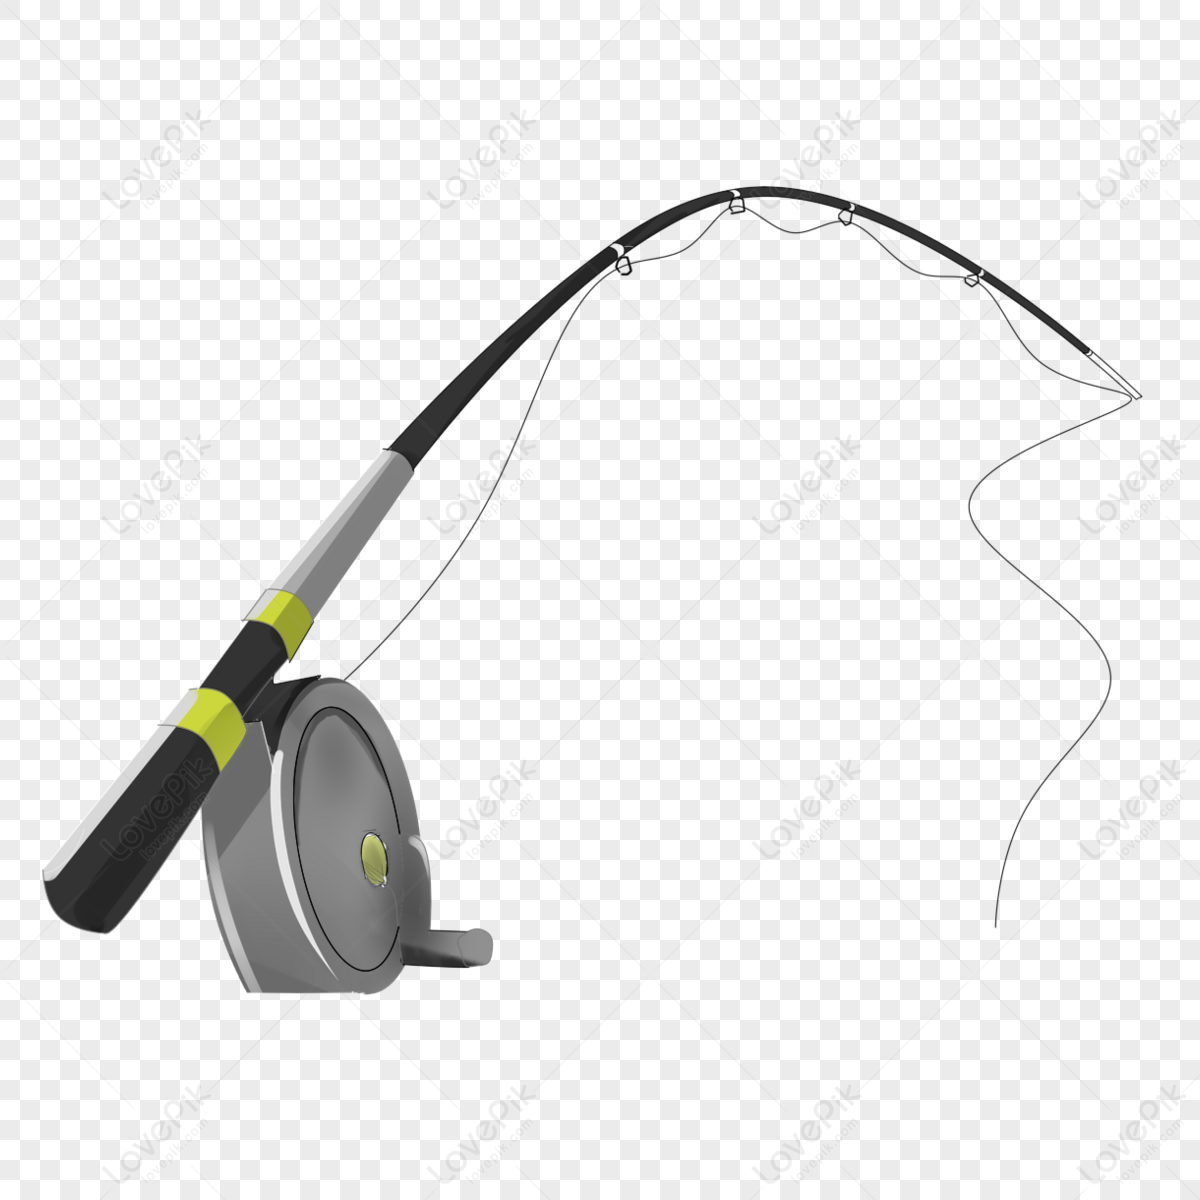 Fishing Rod Cartoon PNG Images With Transparent Background